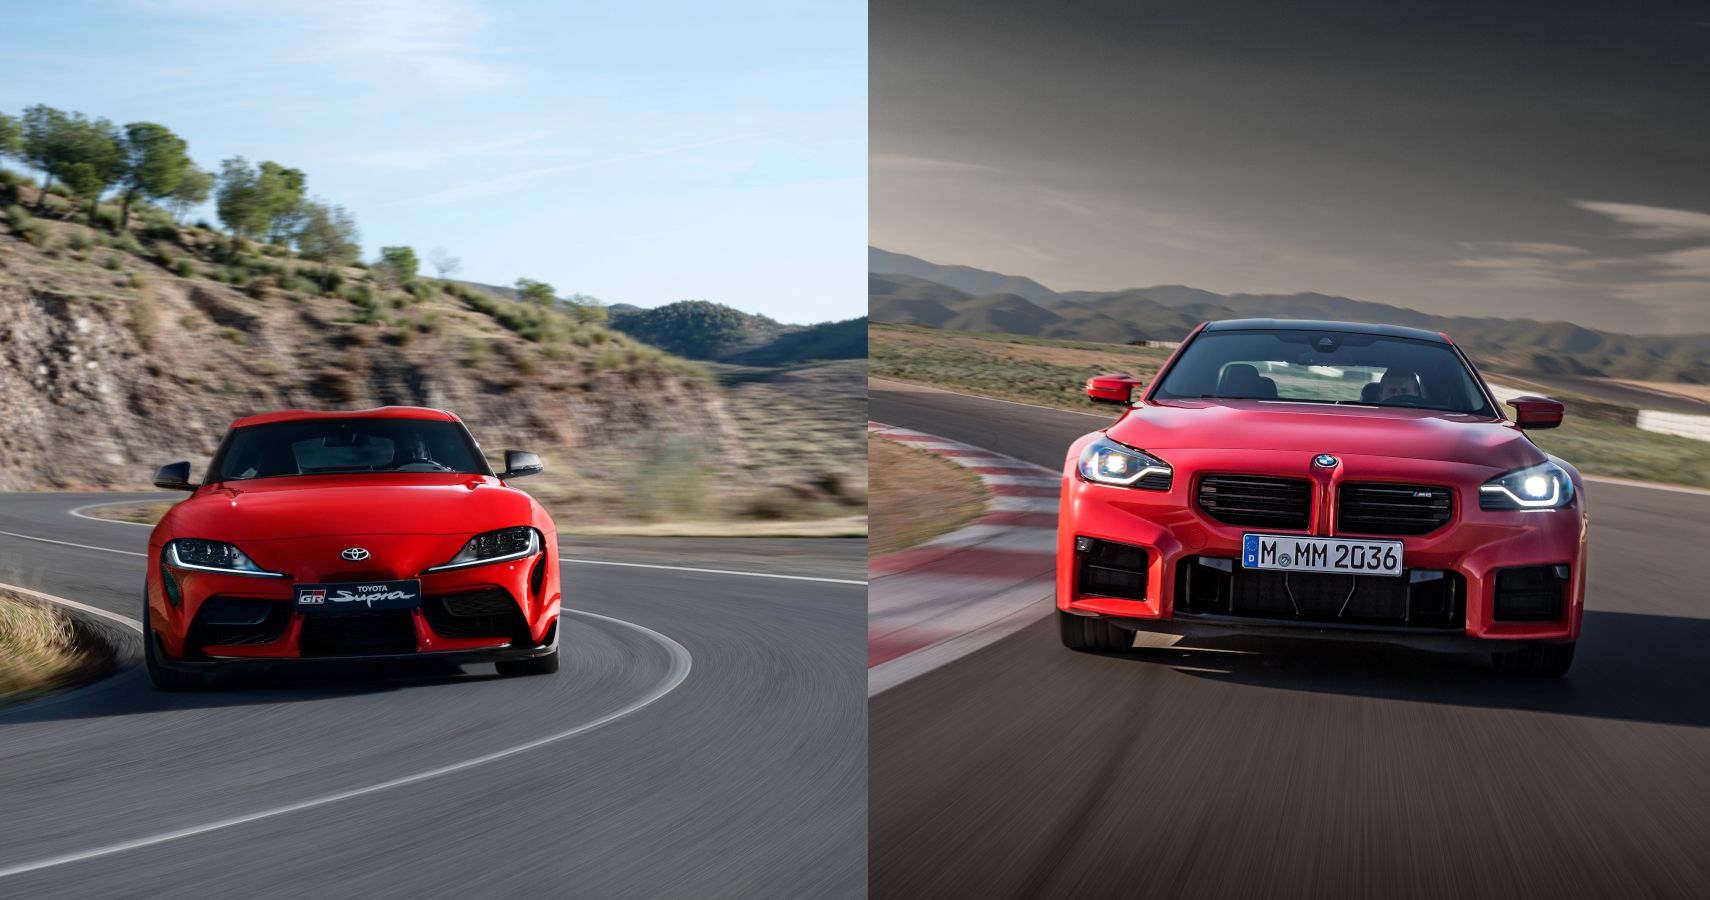 Toyota Supra on the left, BMW M2 on the right